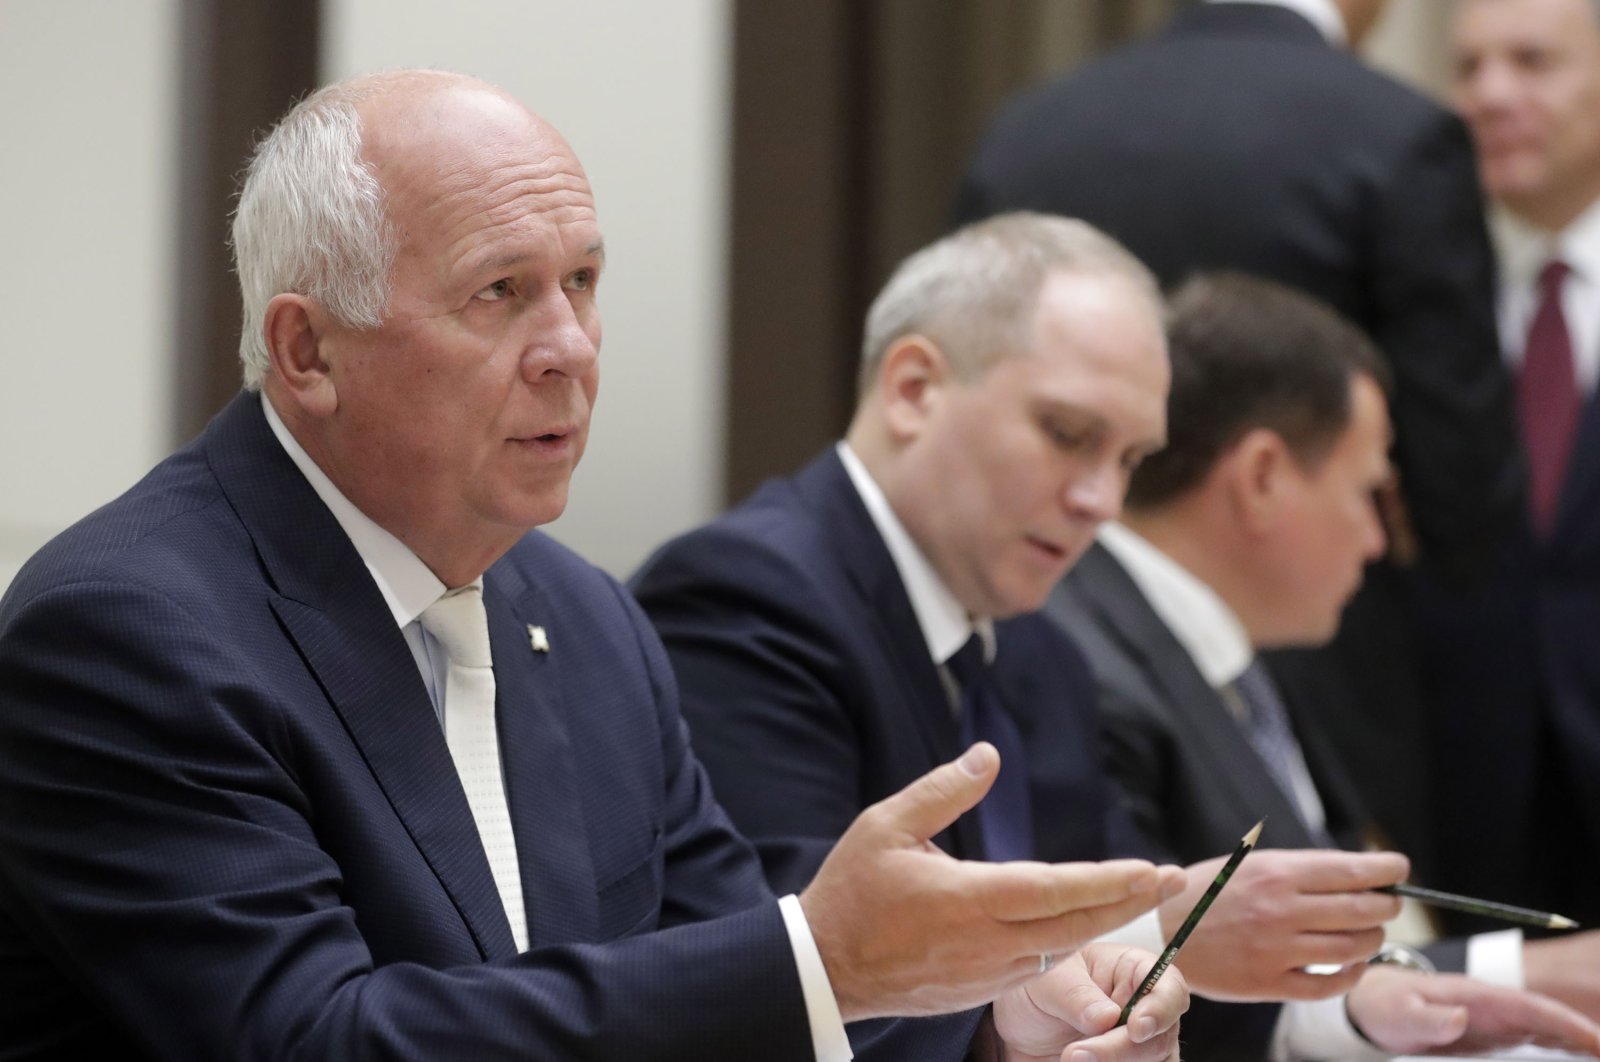 Rostec CEO Sergey Chemezov speaks ahead of a meeting at the Bocharov Ruchei residence, Sochi, Russia, Dec. 2, 2019. (Getty Images)